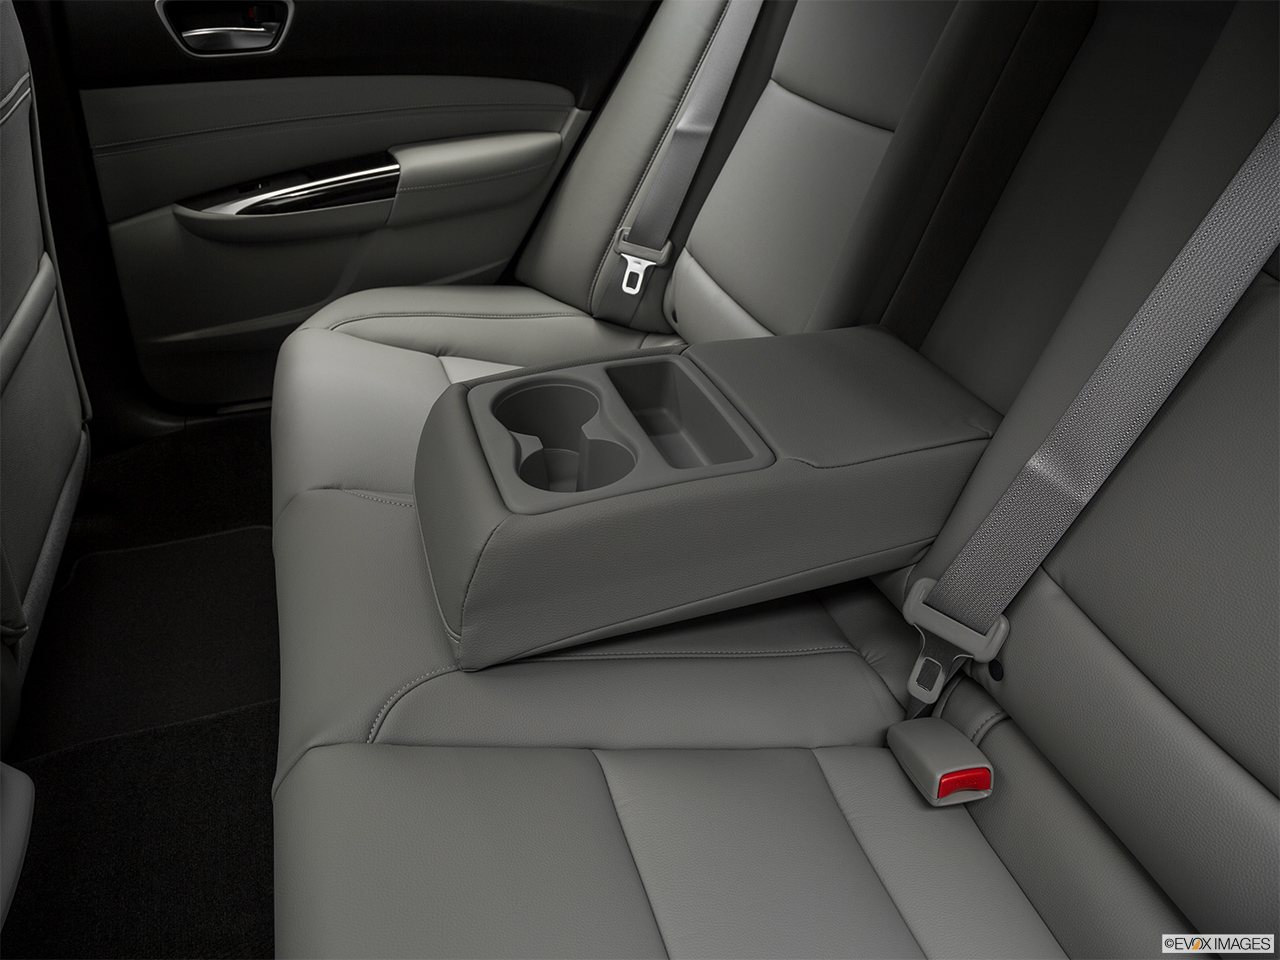 2020 Acura TLX 2.4 8-DCT P-AWS Rear center console with closed lid from driver's side looking down. 